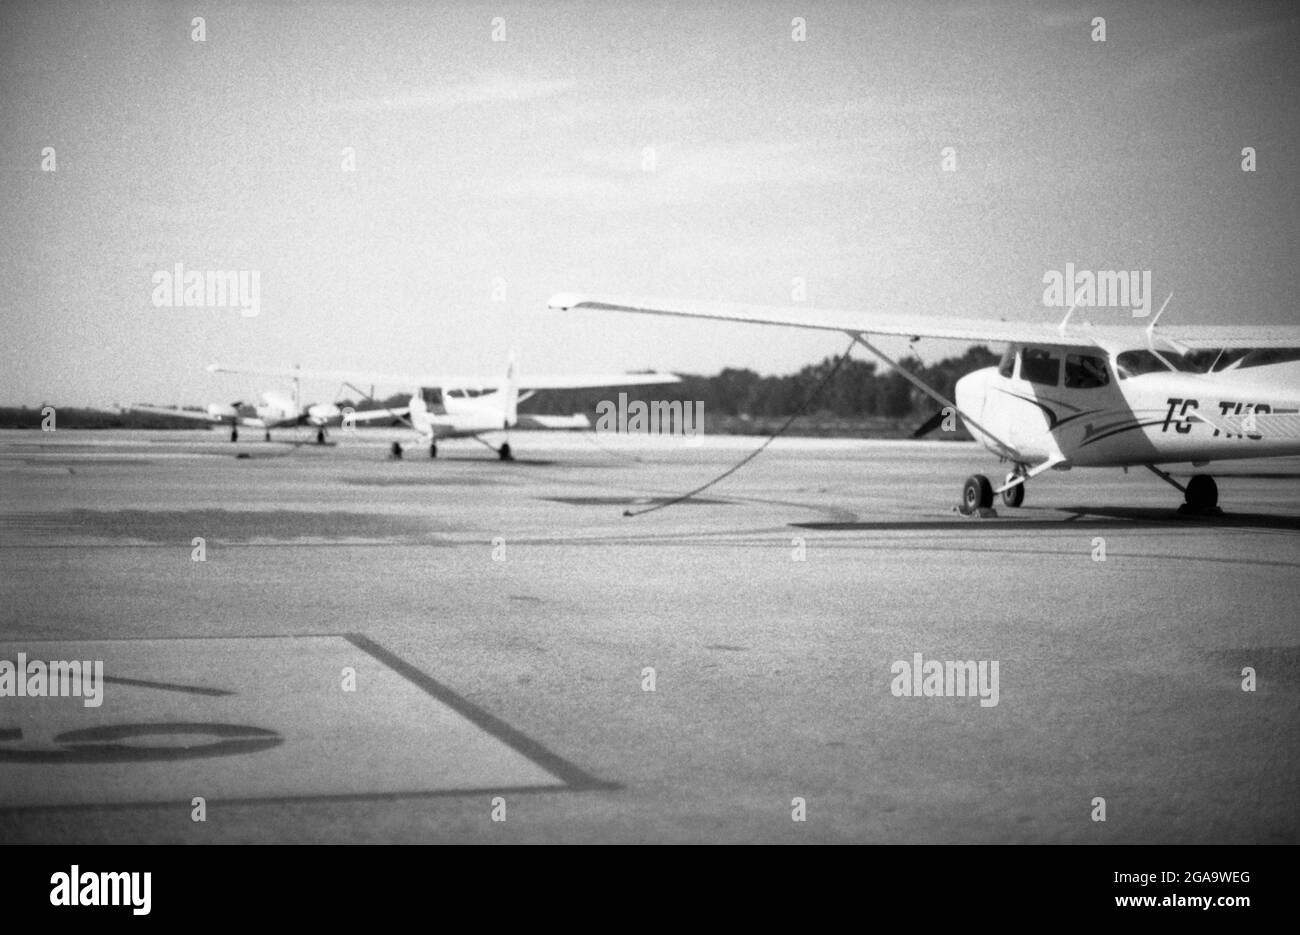 Izmir, Turkey - March 12, 2021: 80 Asa Black and white film scan image of Selcuk airport and three one engined planes on the runway. Selcuk Izmir Turk Stock Photo